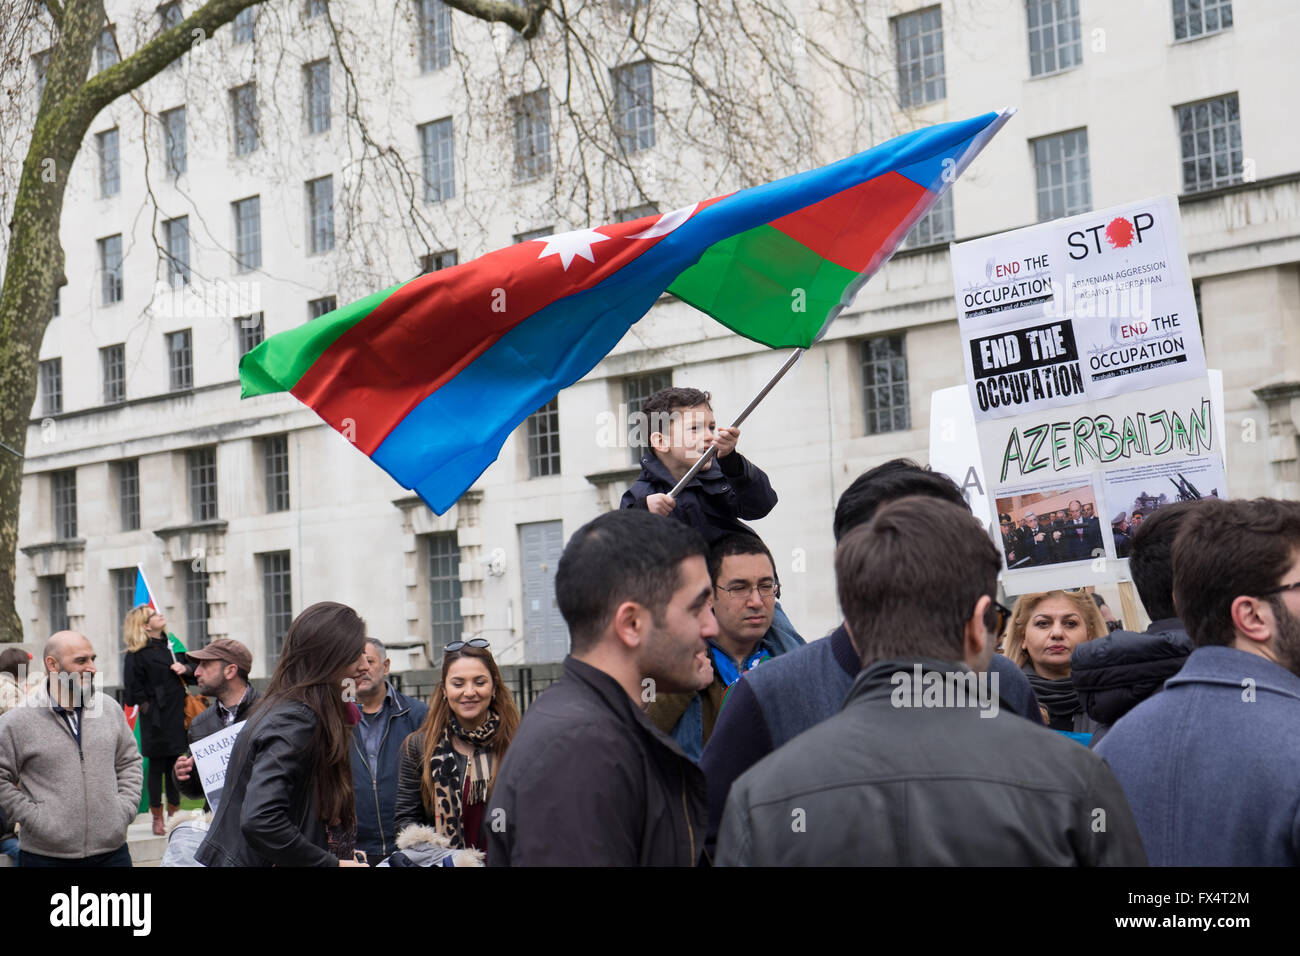 London, UK. 10th April, 2016. Azeri people living in the UK stage a protest meeting organized by the European Azerbaijan Society against Armenian aggression starting at Trafalgar Square and ending at 10 Downing Street. Credit:  lovethephoto/Alamy Live News Stock Photo